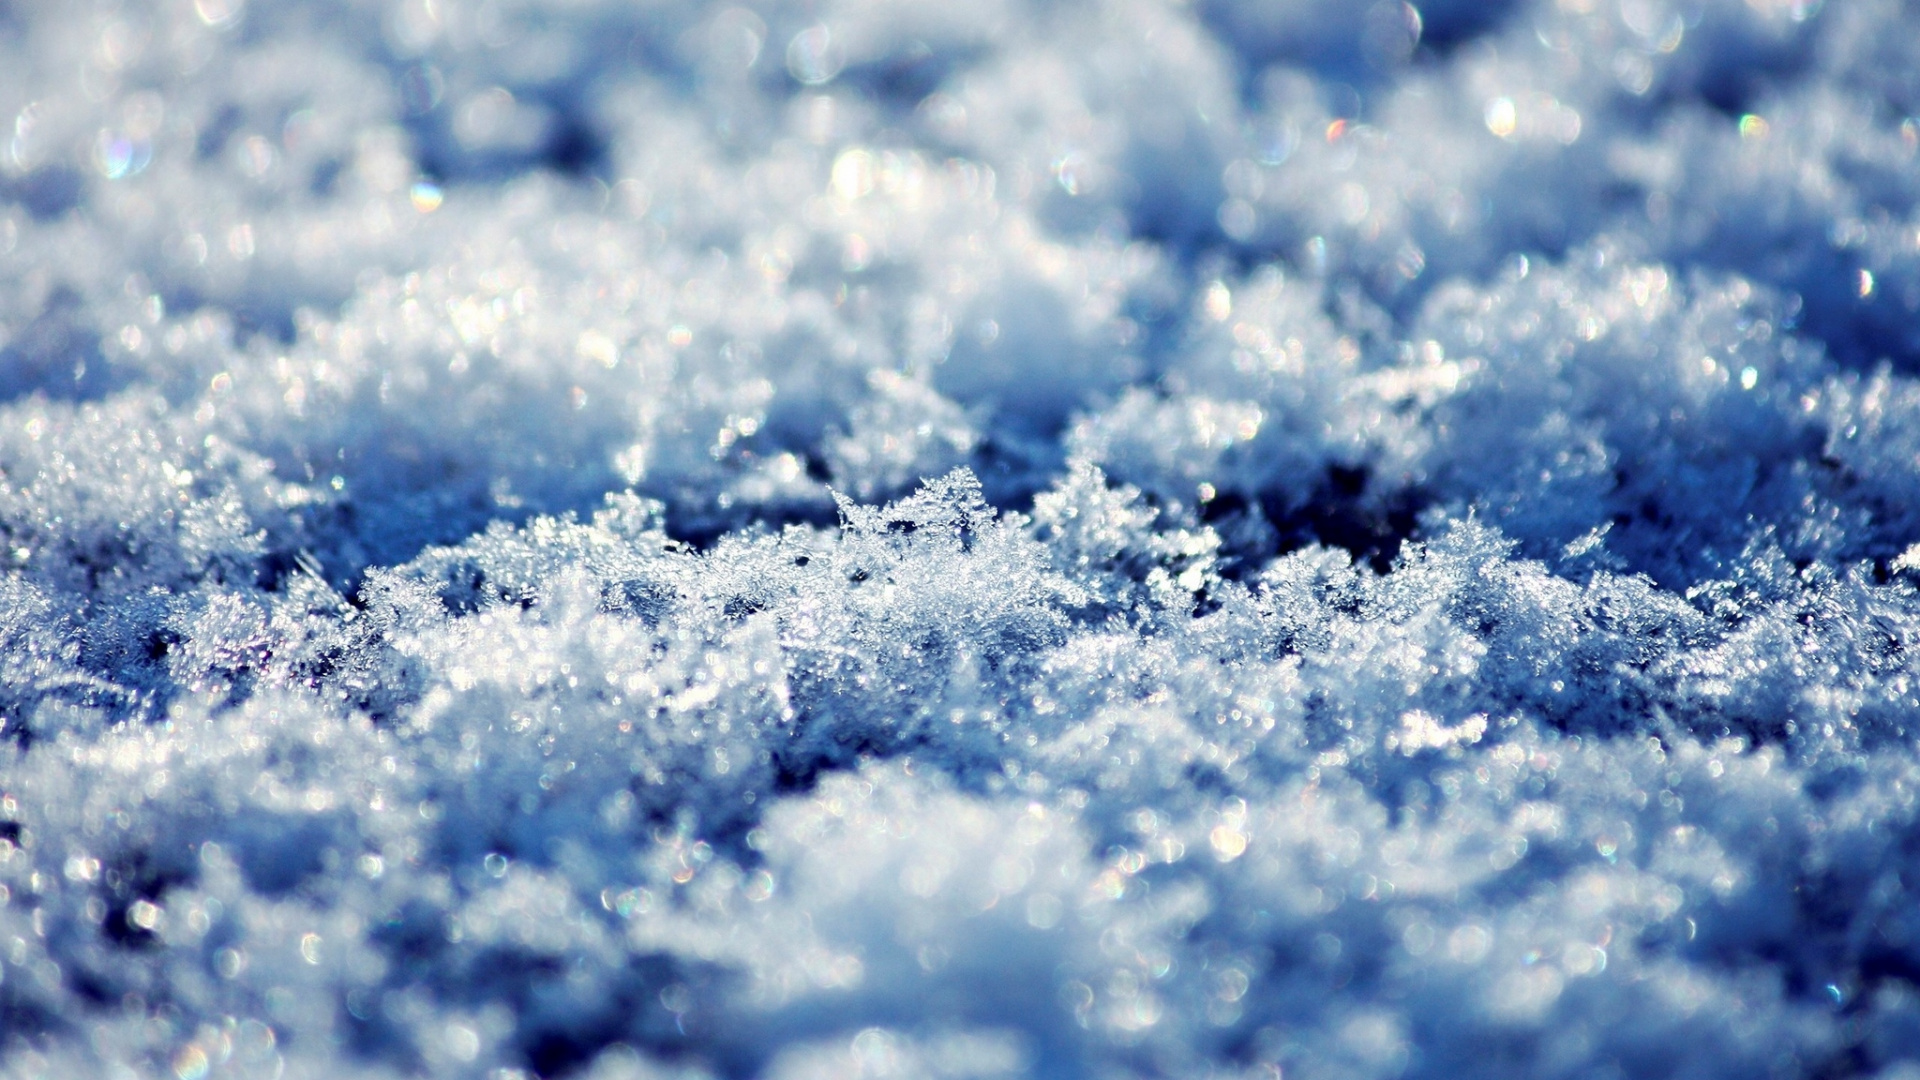 White Snow on Blue Background. Wallpaper in 1920x1080 Resolution